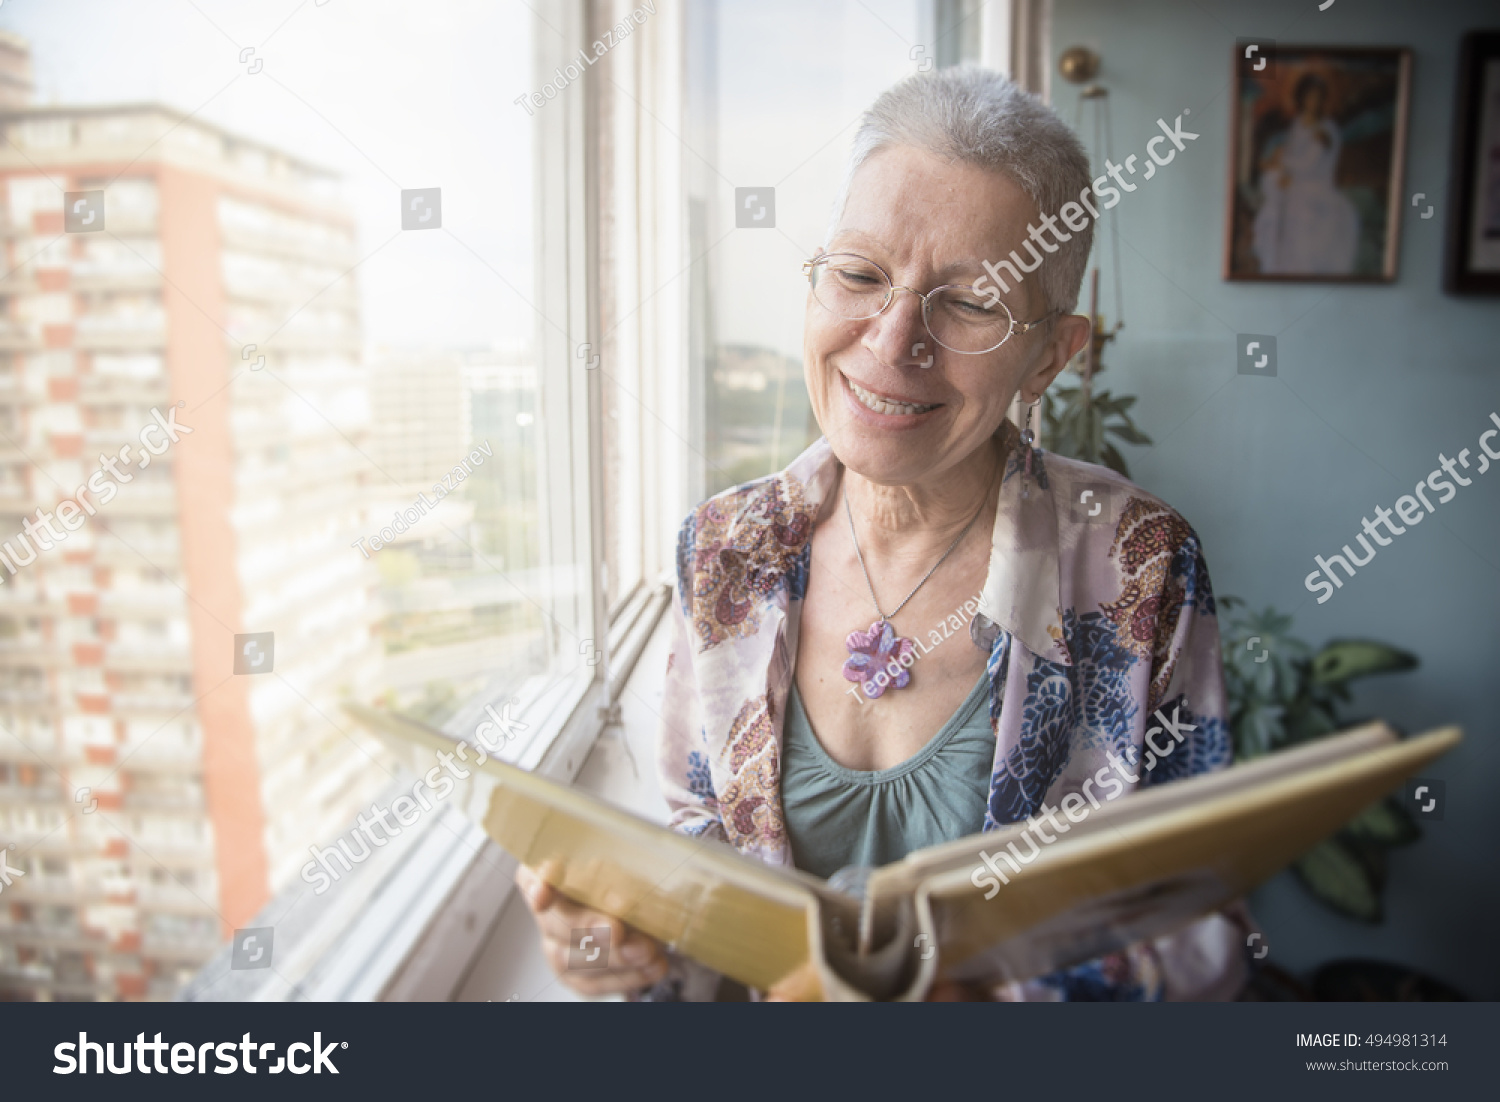 Senior lady looking at old photographs in an album, remembering her past #494981314